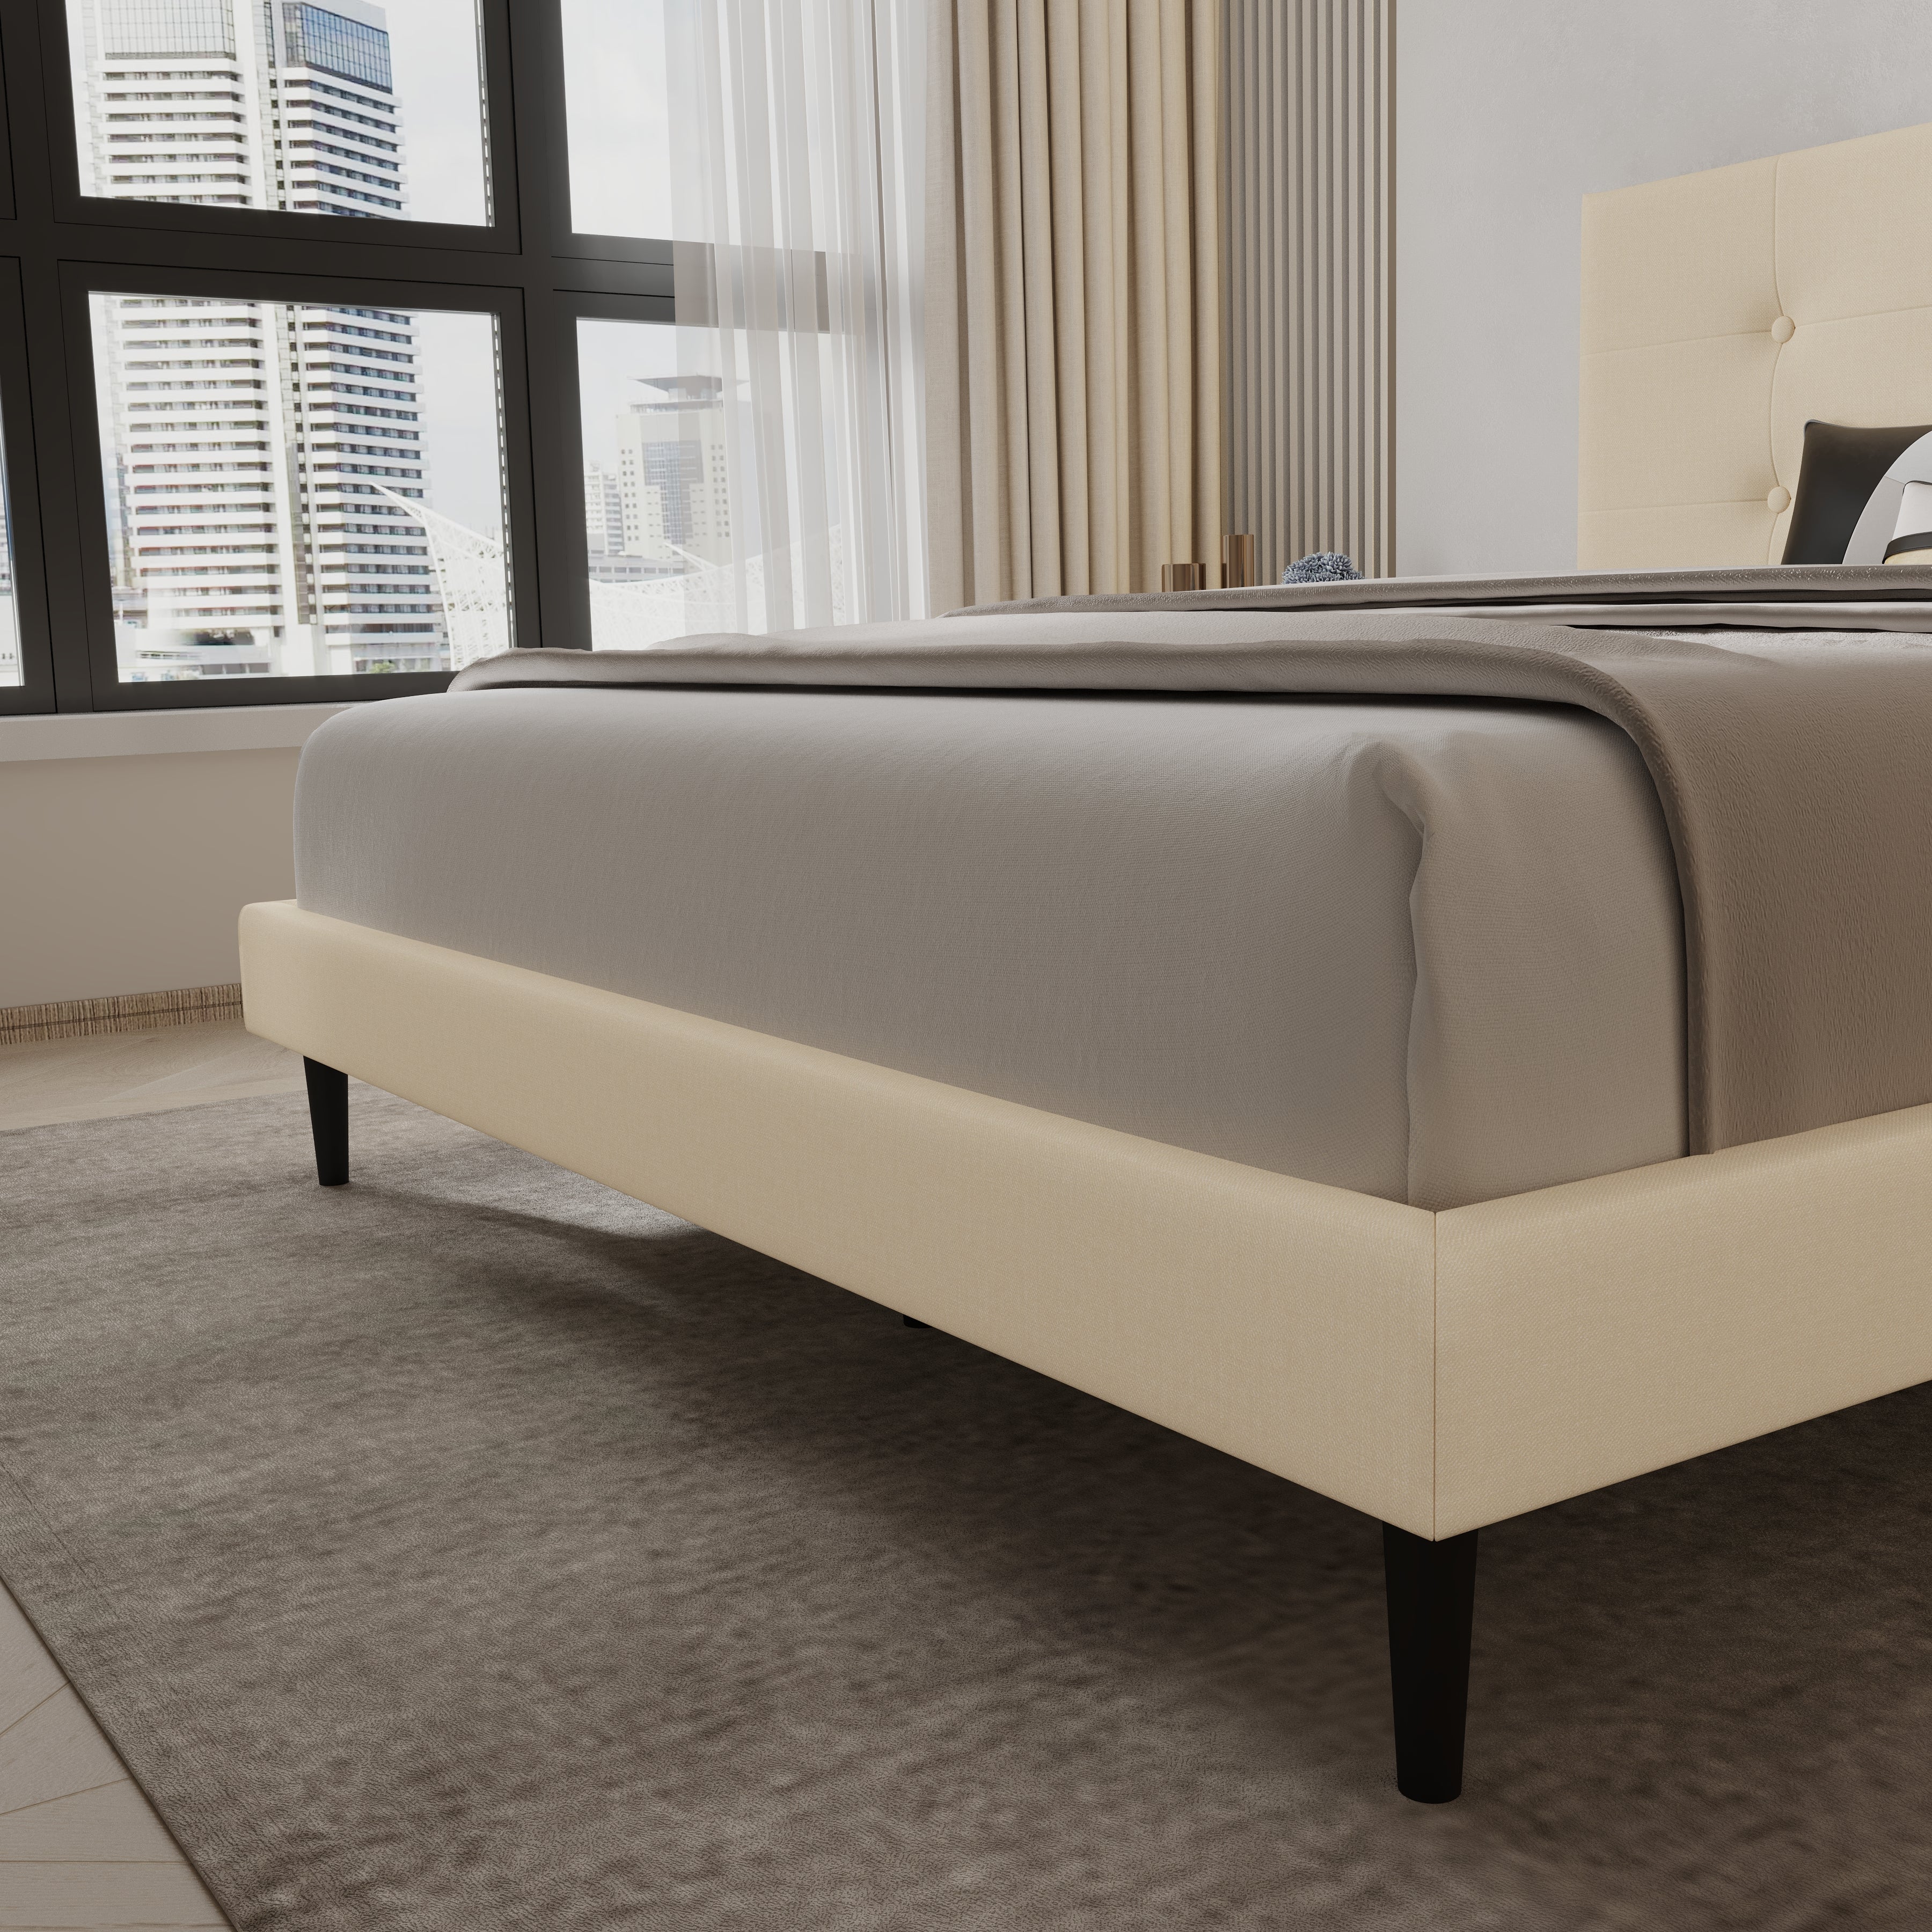 Velets Nora Contemporary Mid-Century Soft Padded Tufted Fabric Upholstered Low-profile Platform Bed with Adjustable Headboard - Solid Wood Frame Construction, Wood Slat System - Beige